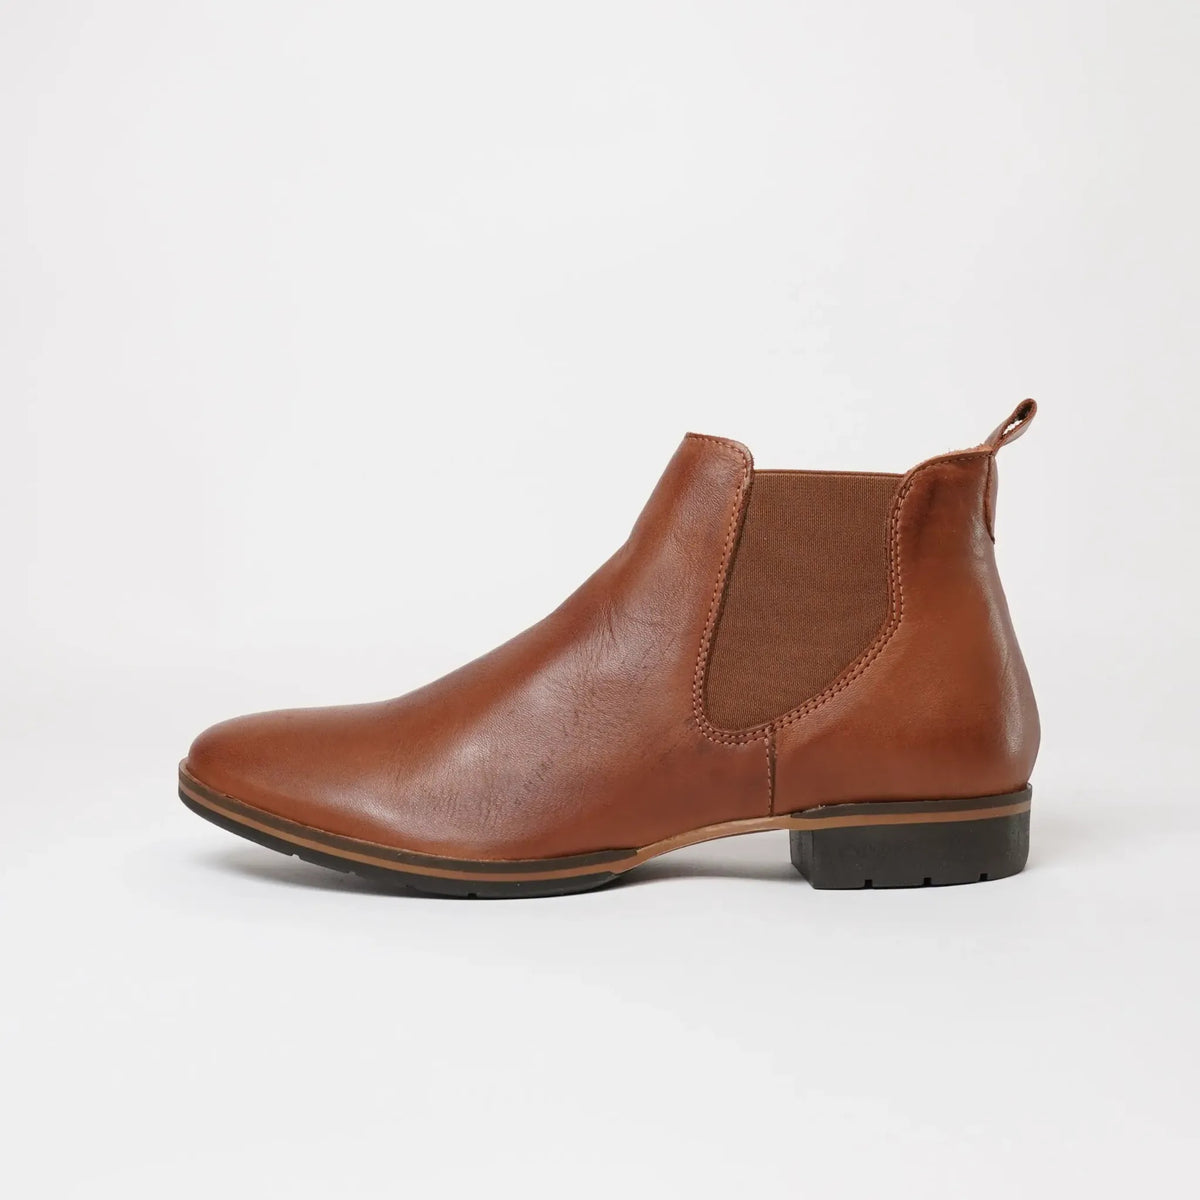 Gala Brandy Leather Ankle Boots